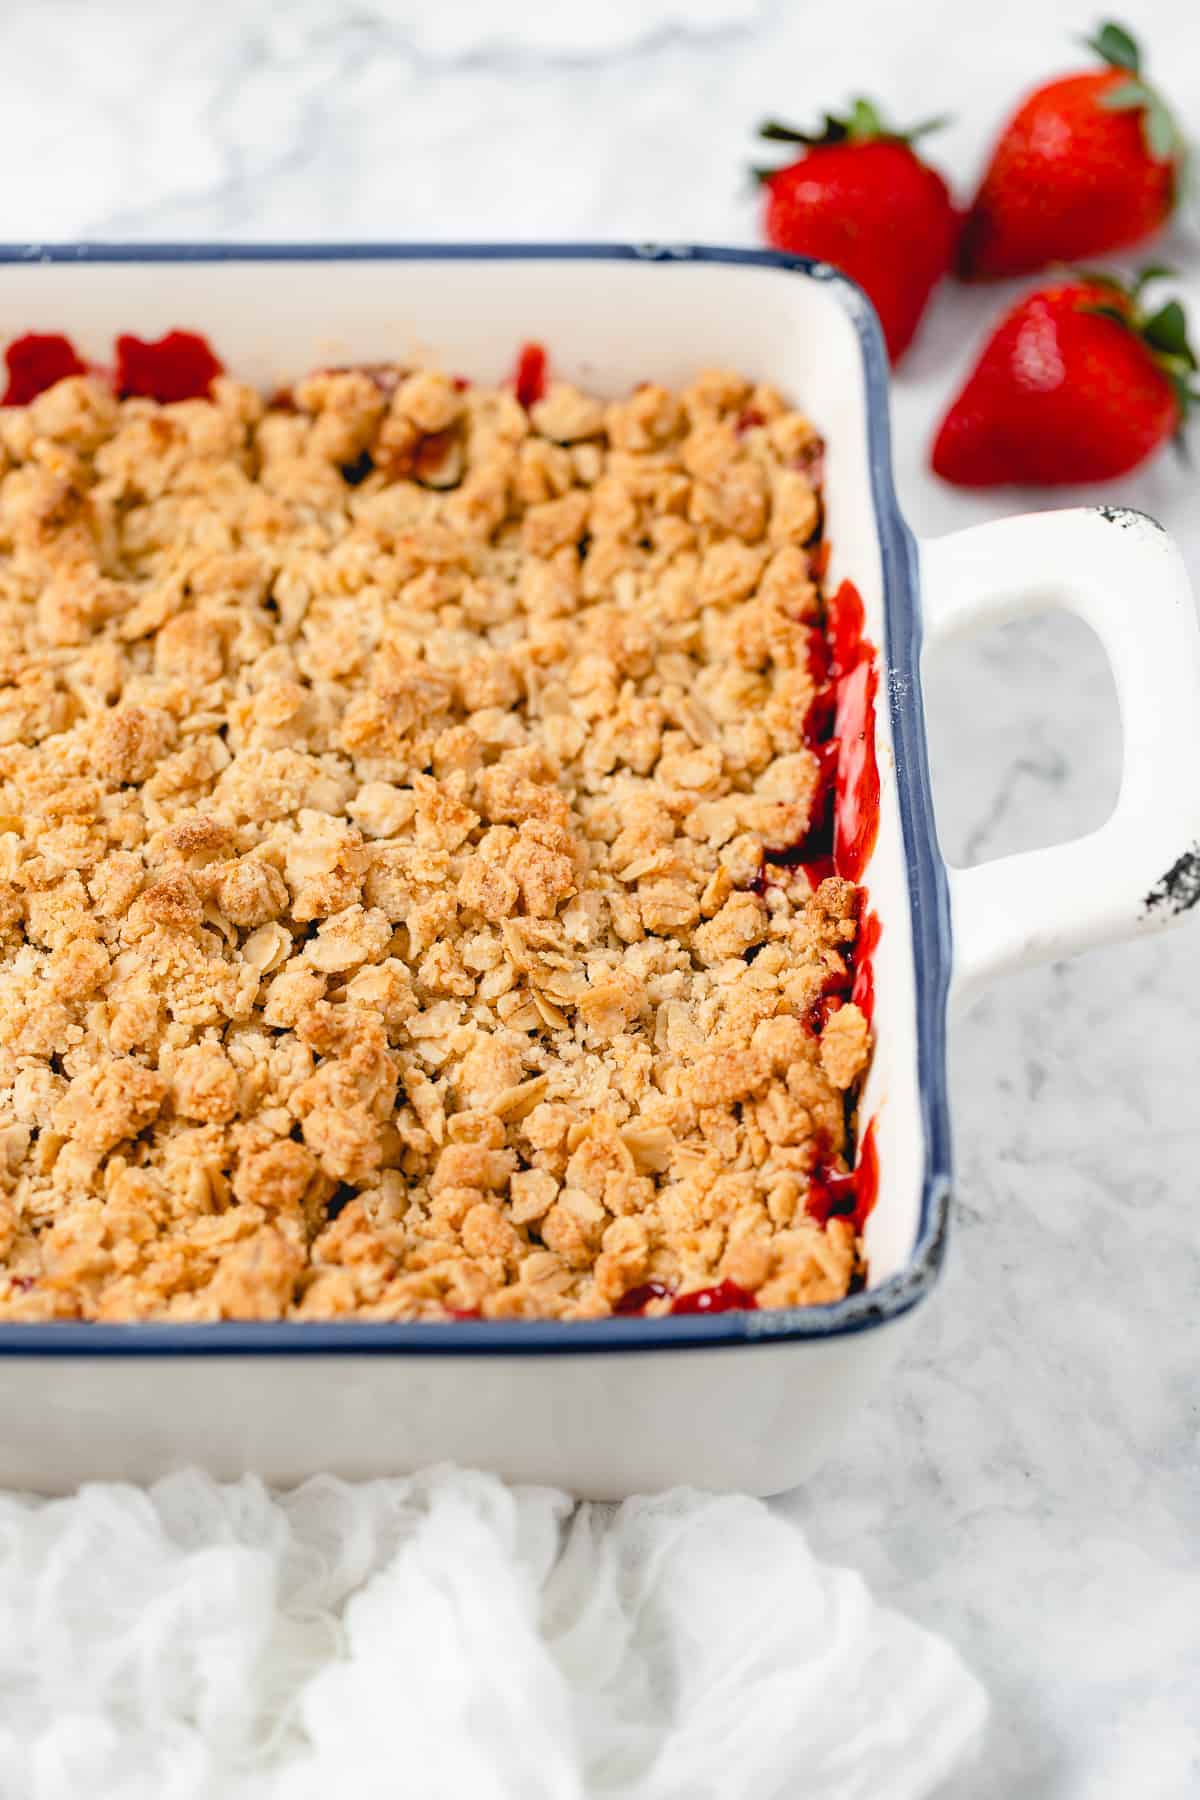 finished strawberry crisp with red sauce oozing under golden brown crisp topping